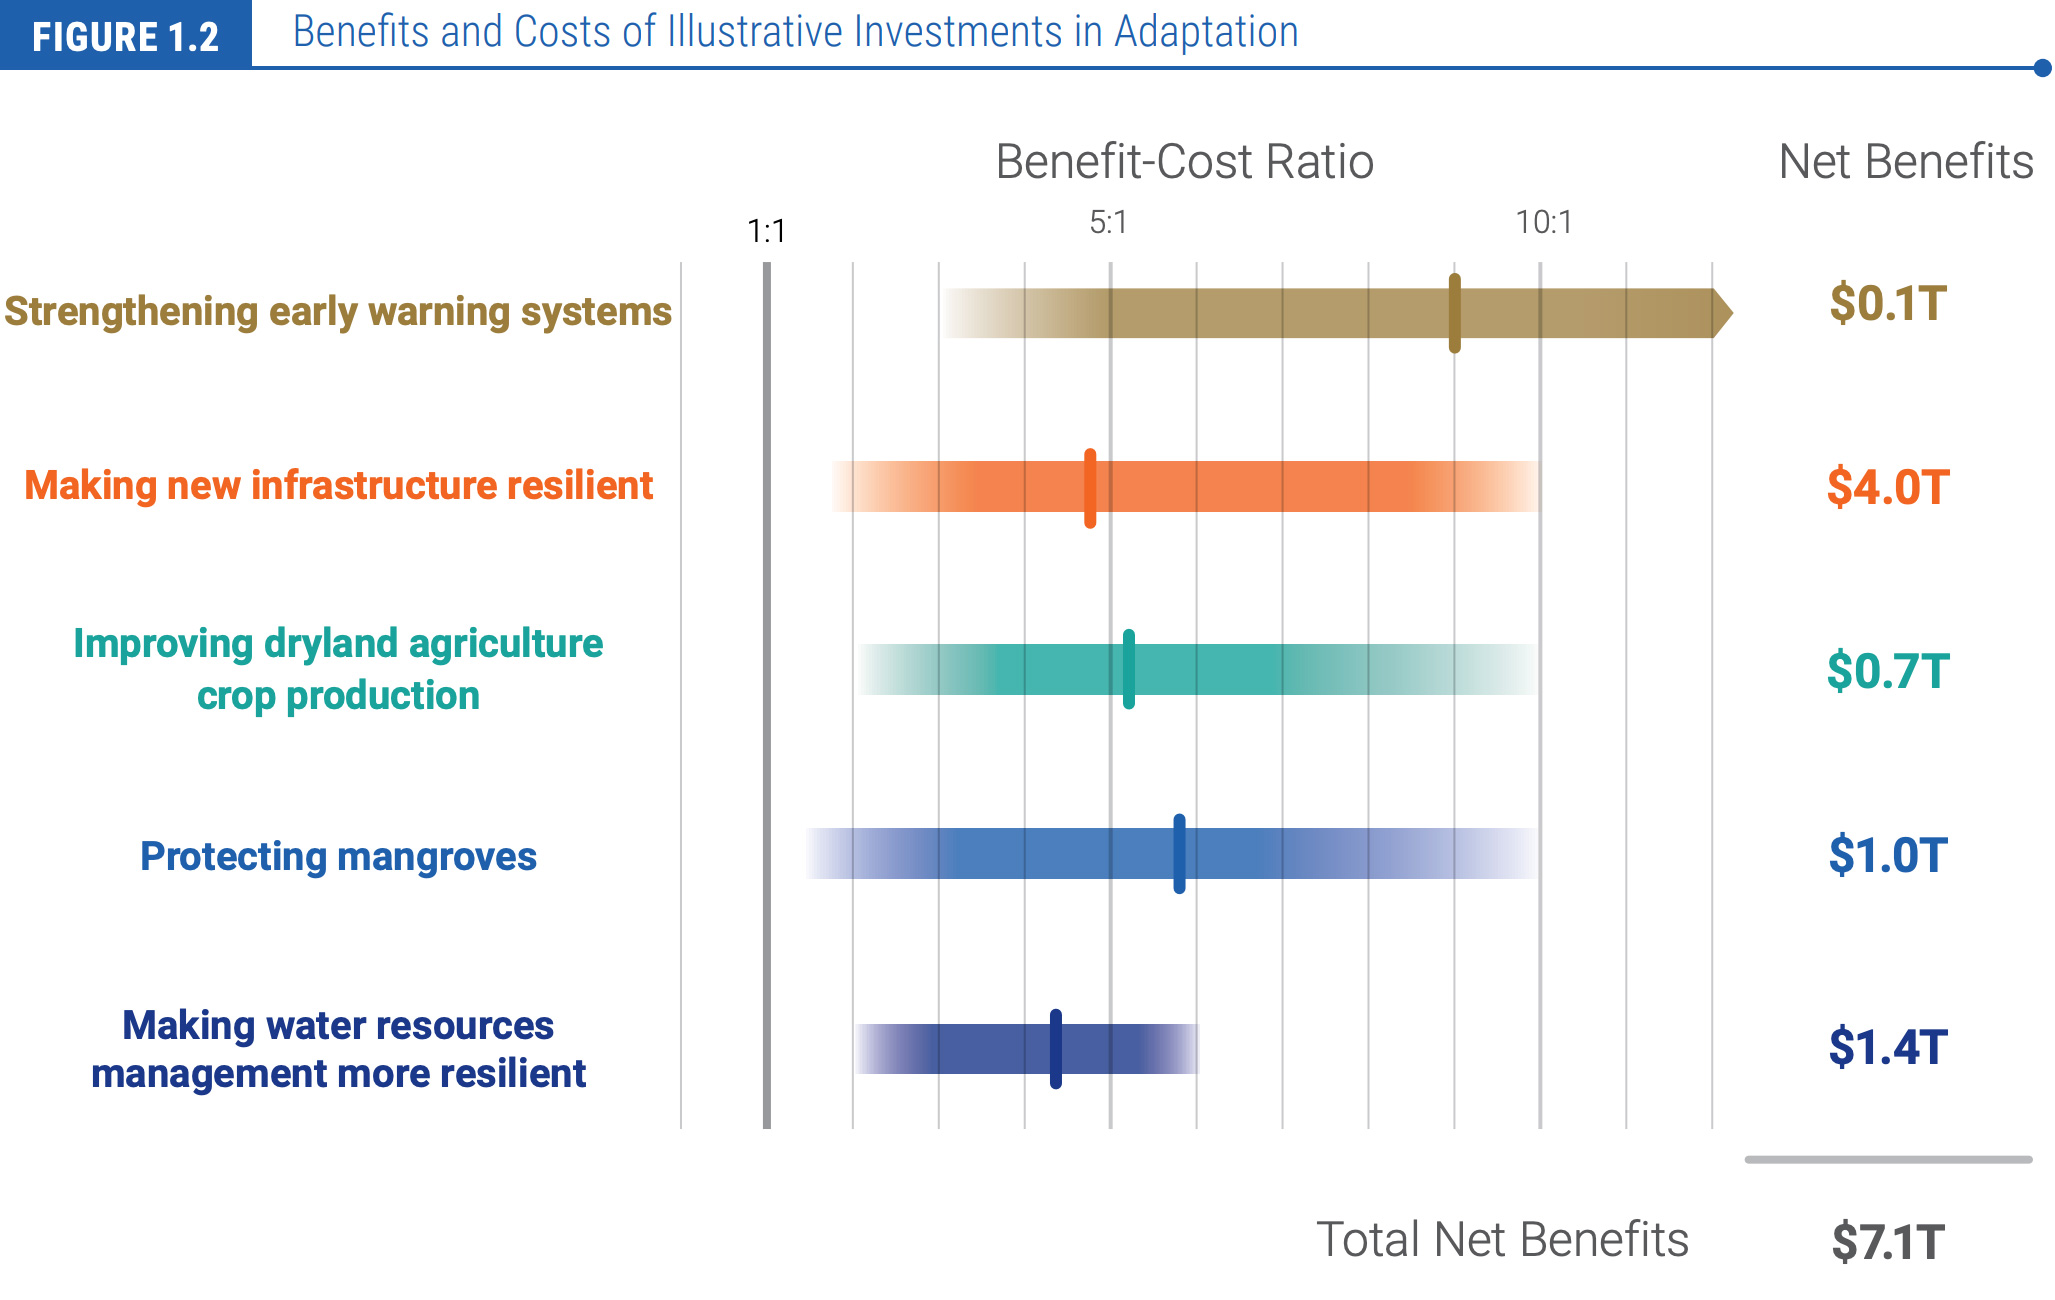 Benefits and Costs of Illustrative Investments in Adaptation